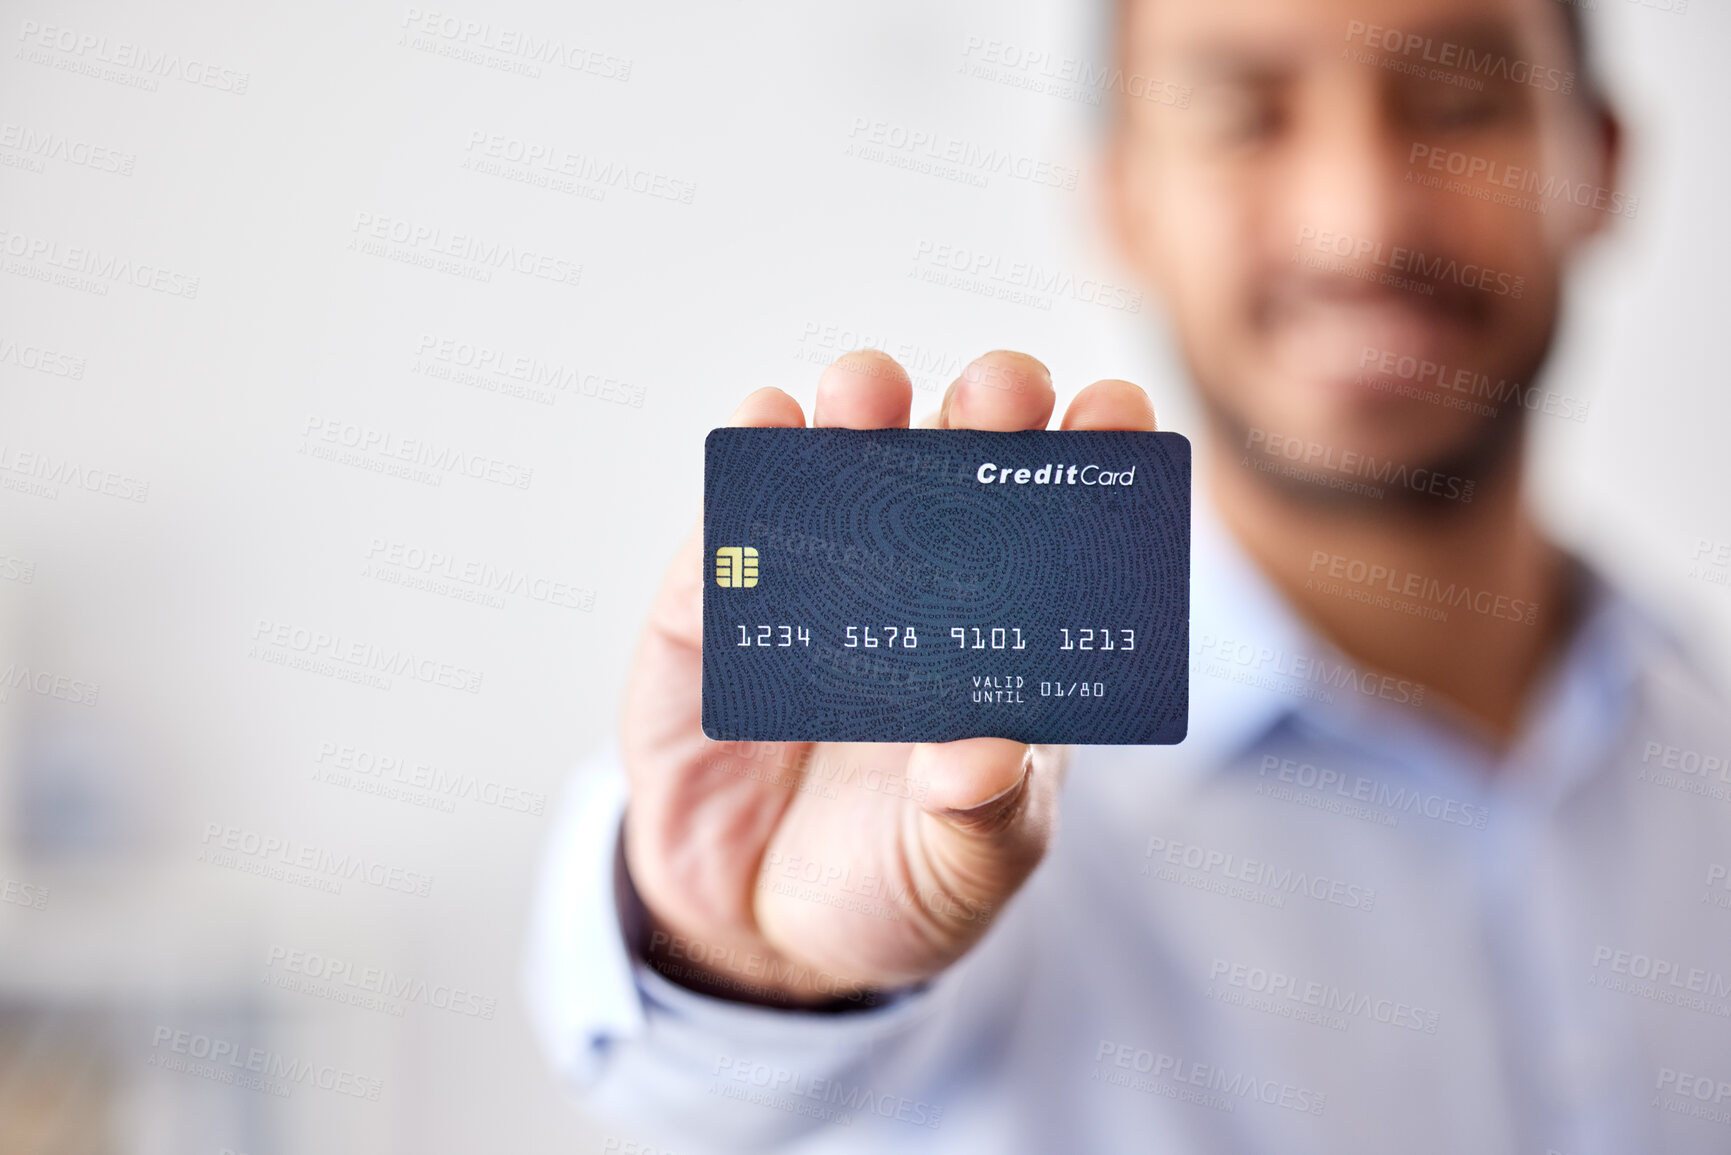 Buy stock photo Buying, shopping and banking with a credit card or making payment, orders or bank loans. One person holding, showing and displaying a debit card to use for purchasing items, retail therapy and paying